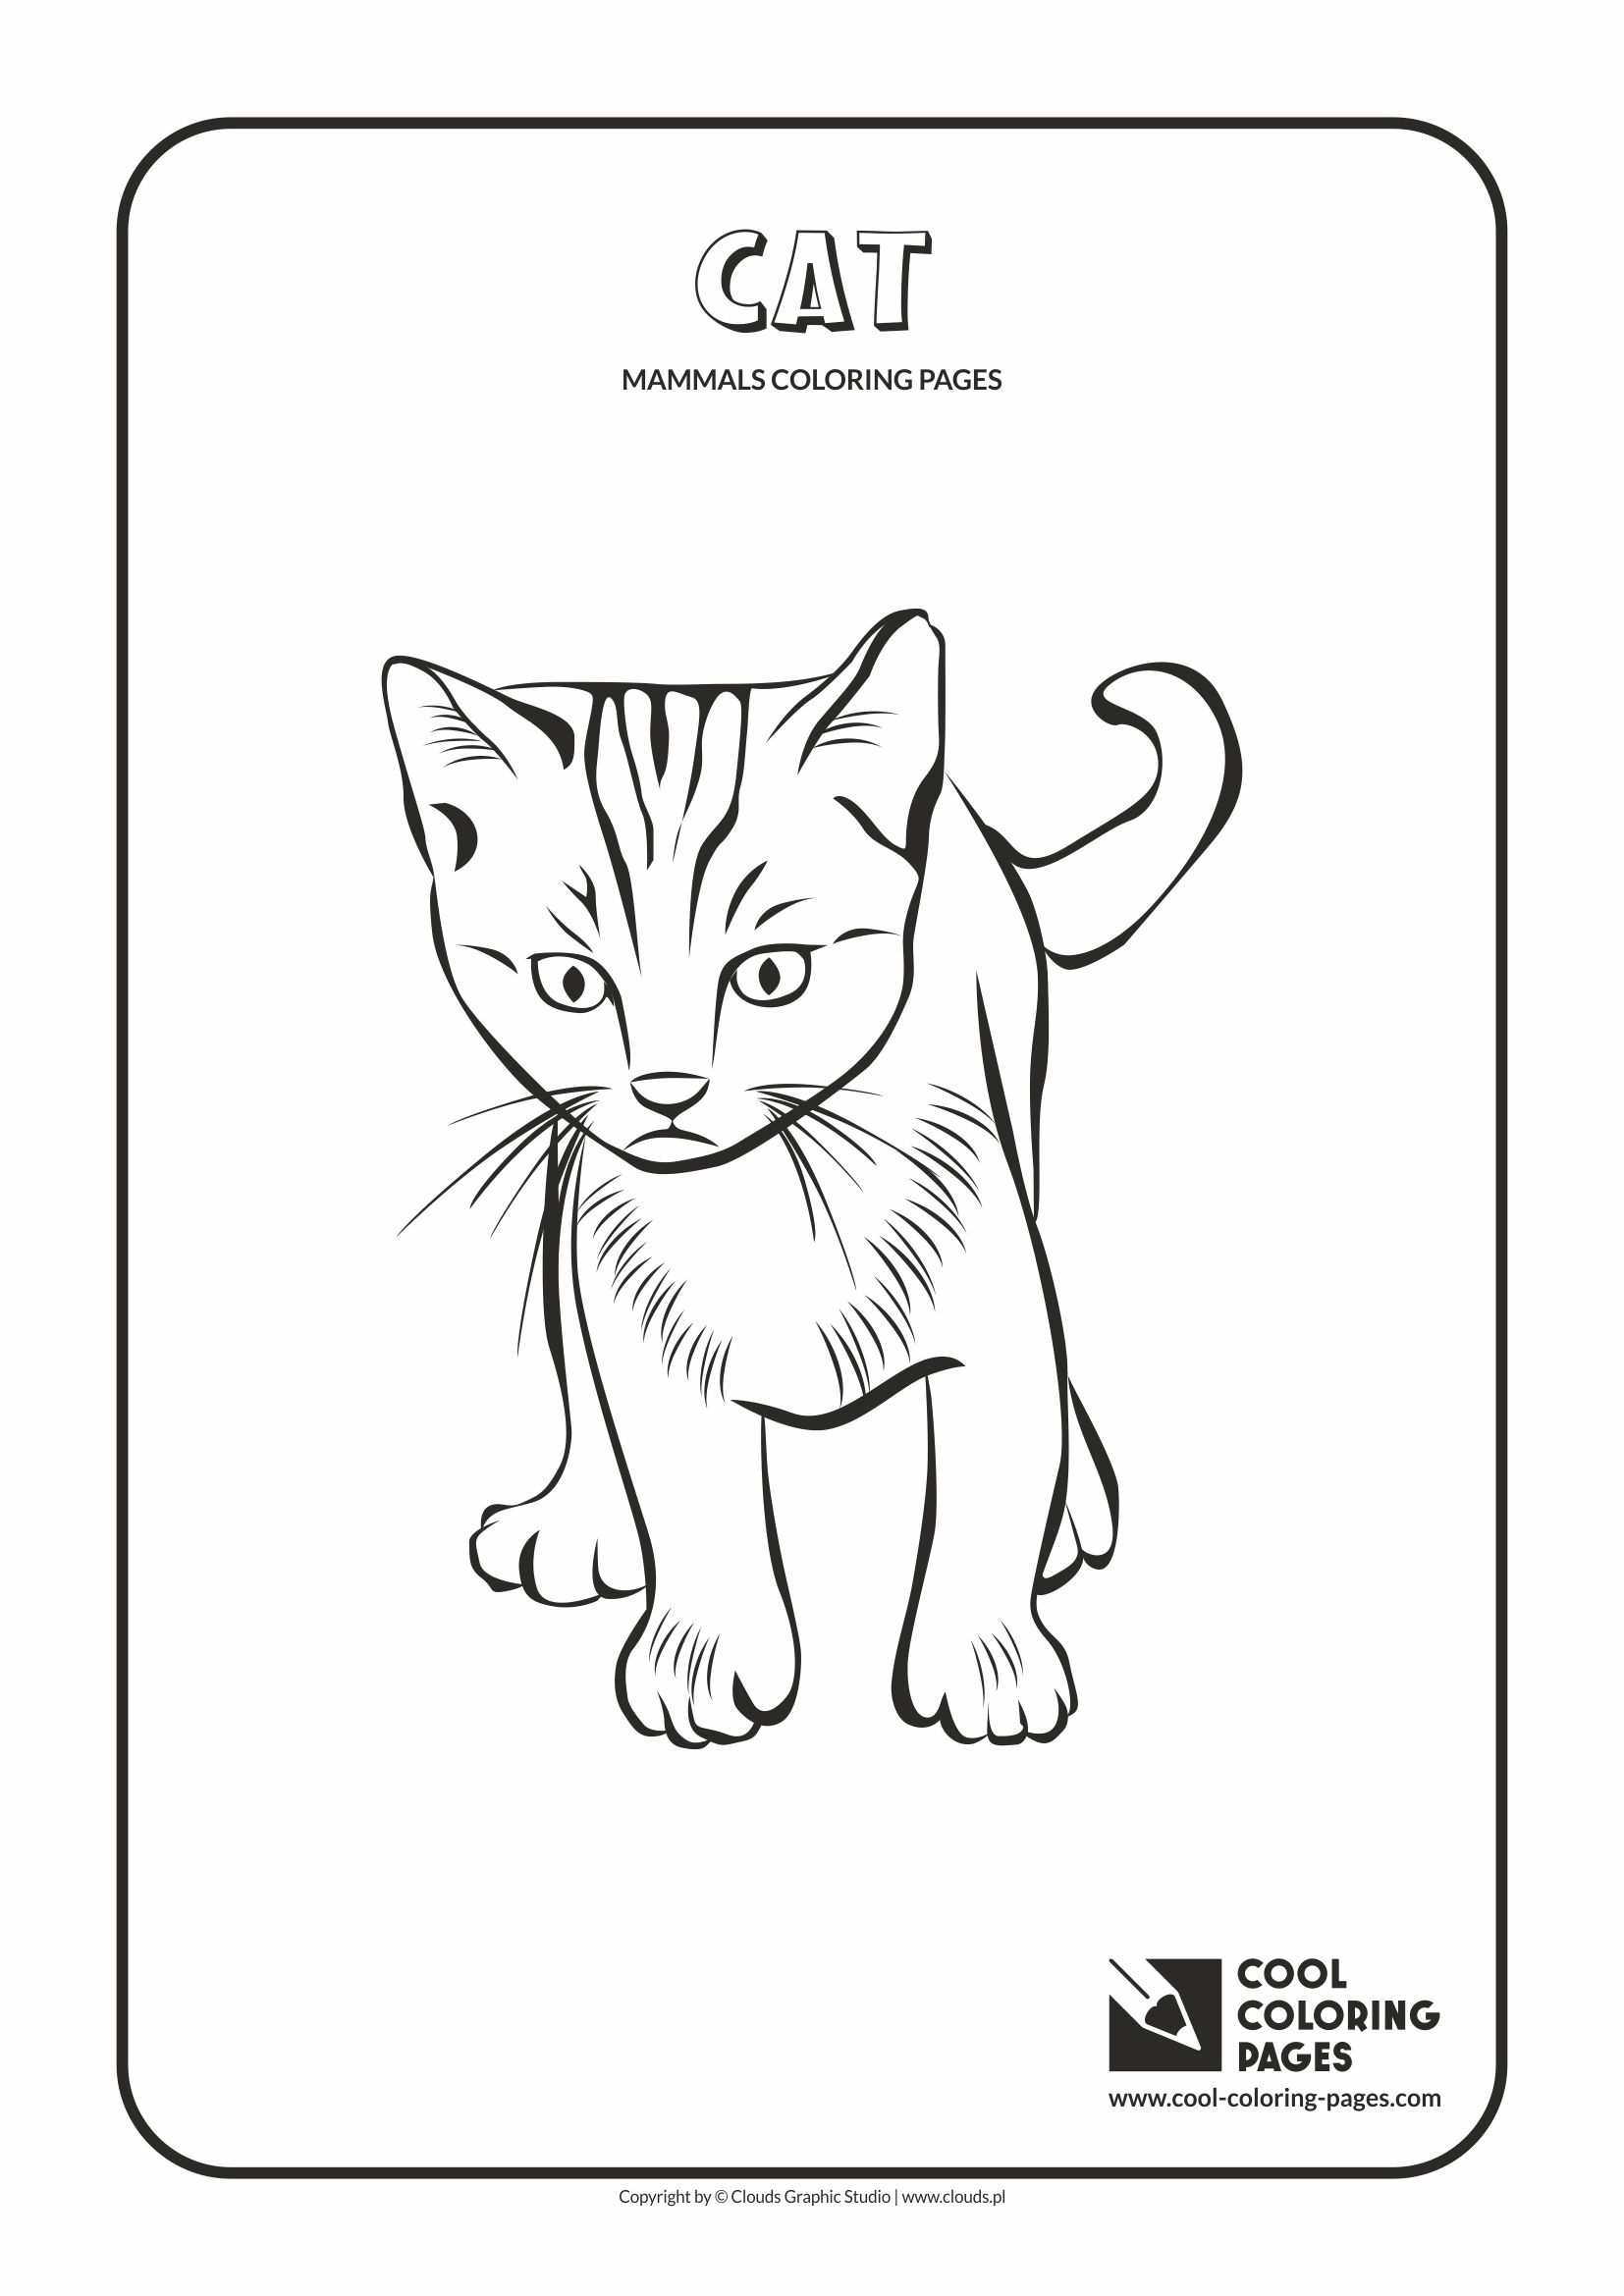 Cool Coloring Pages - Animals / Mammals. Coloring page with cat